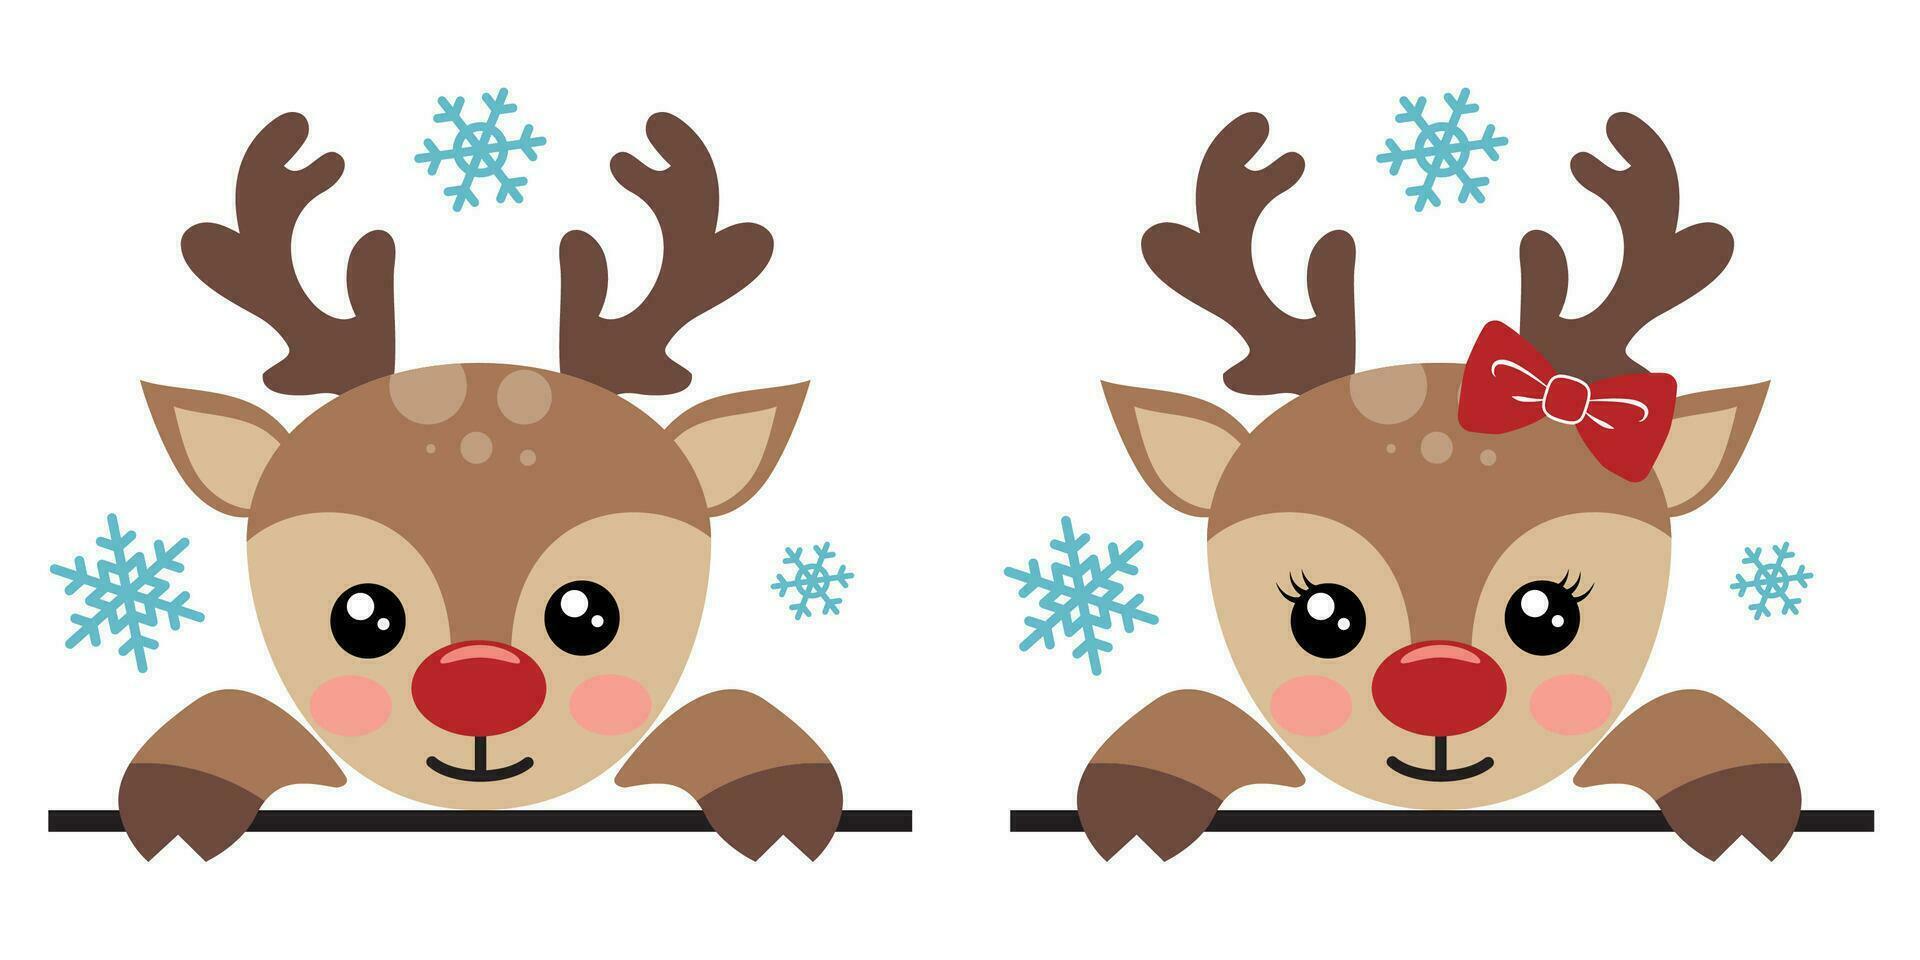 Cutest reindeer frame vector illustration with cute deer face. Kids Christmas design isolated good for Xmas greetings cards, poster, print, sticker, invitations, baby t-shirt, mug, gifts.